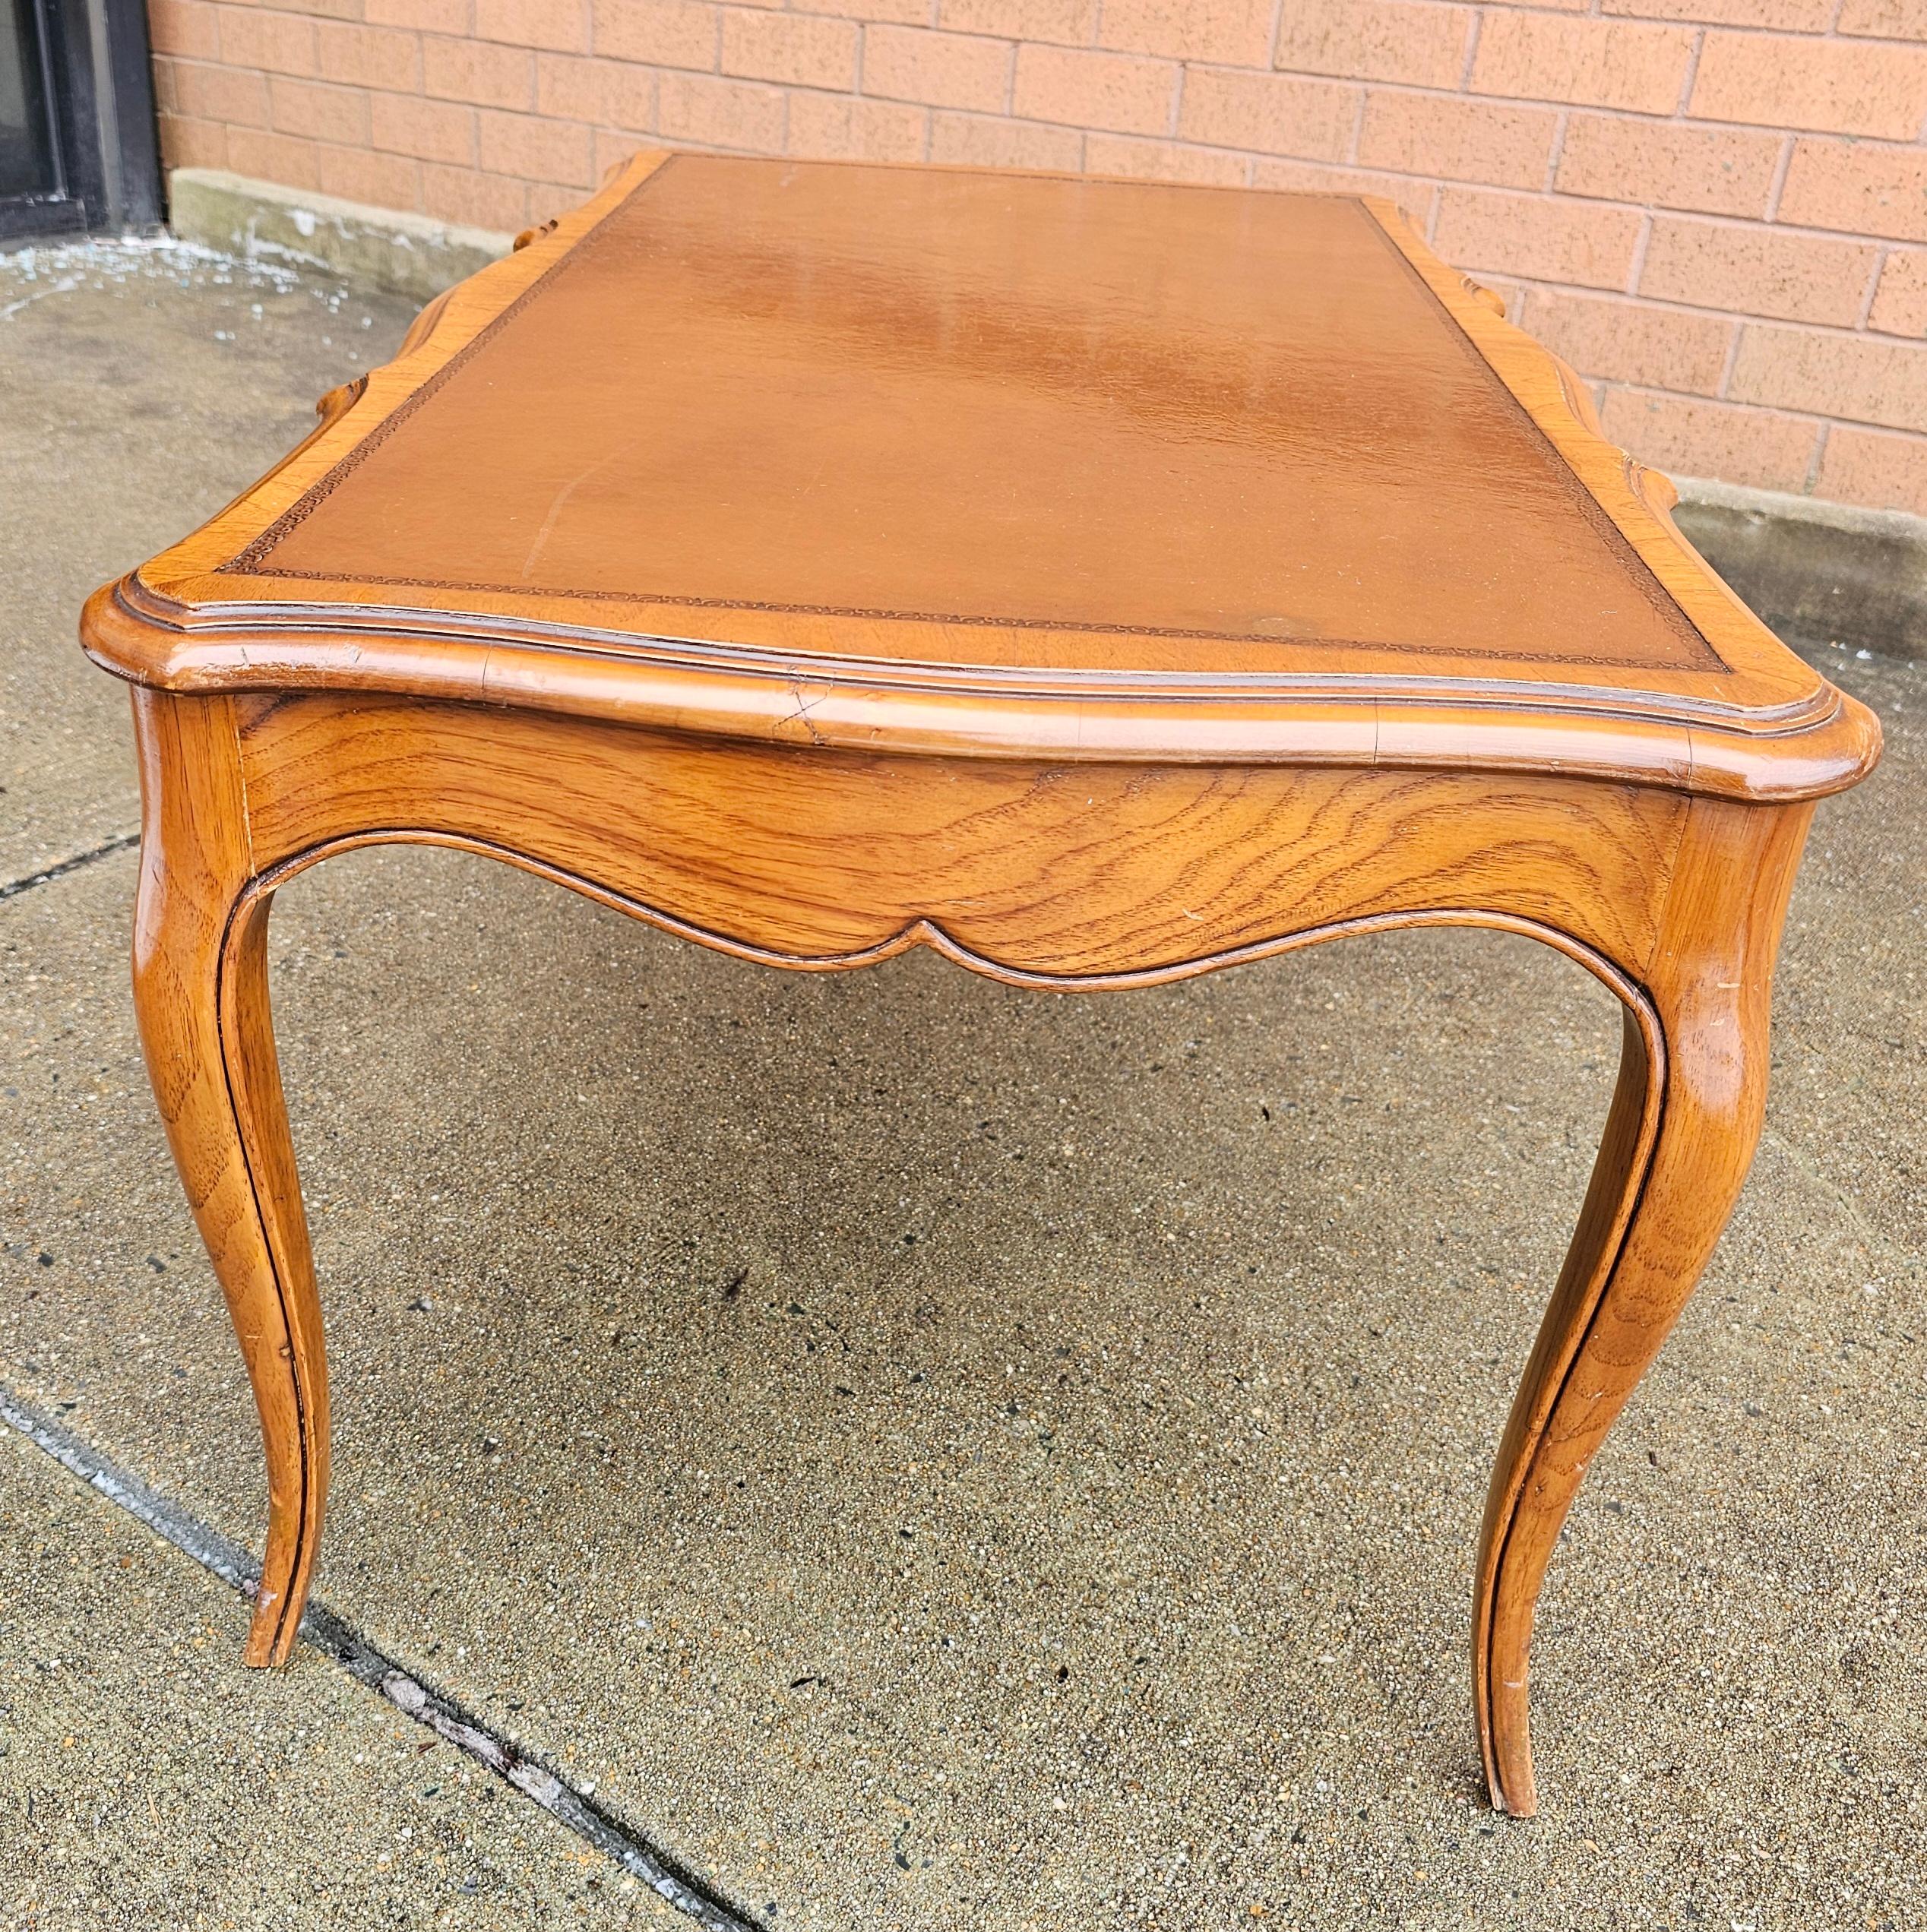 A 1942 W and J Sloane New York  Louis XV Style Tooled Leather Inset Top Walnut Coffee Table in very good vintage condition. Measures 36.5